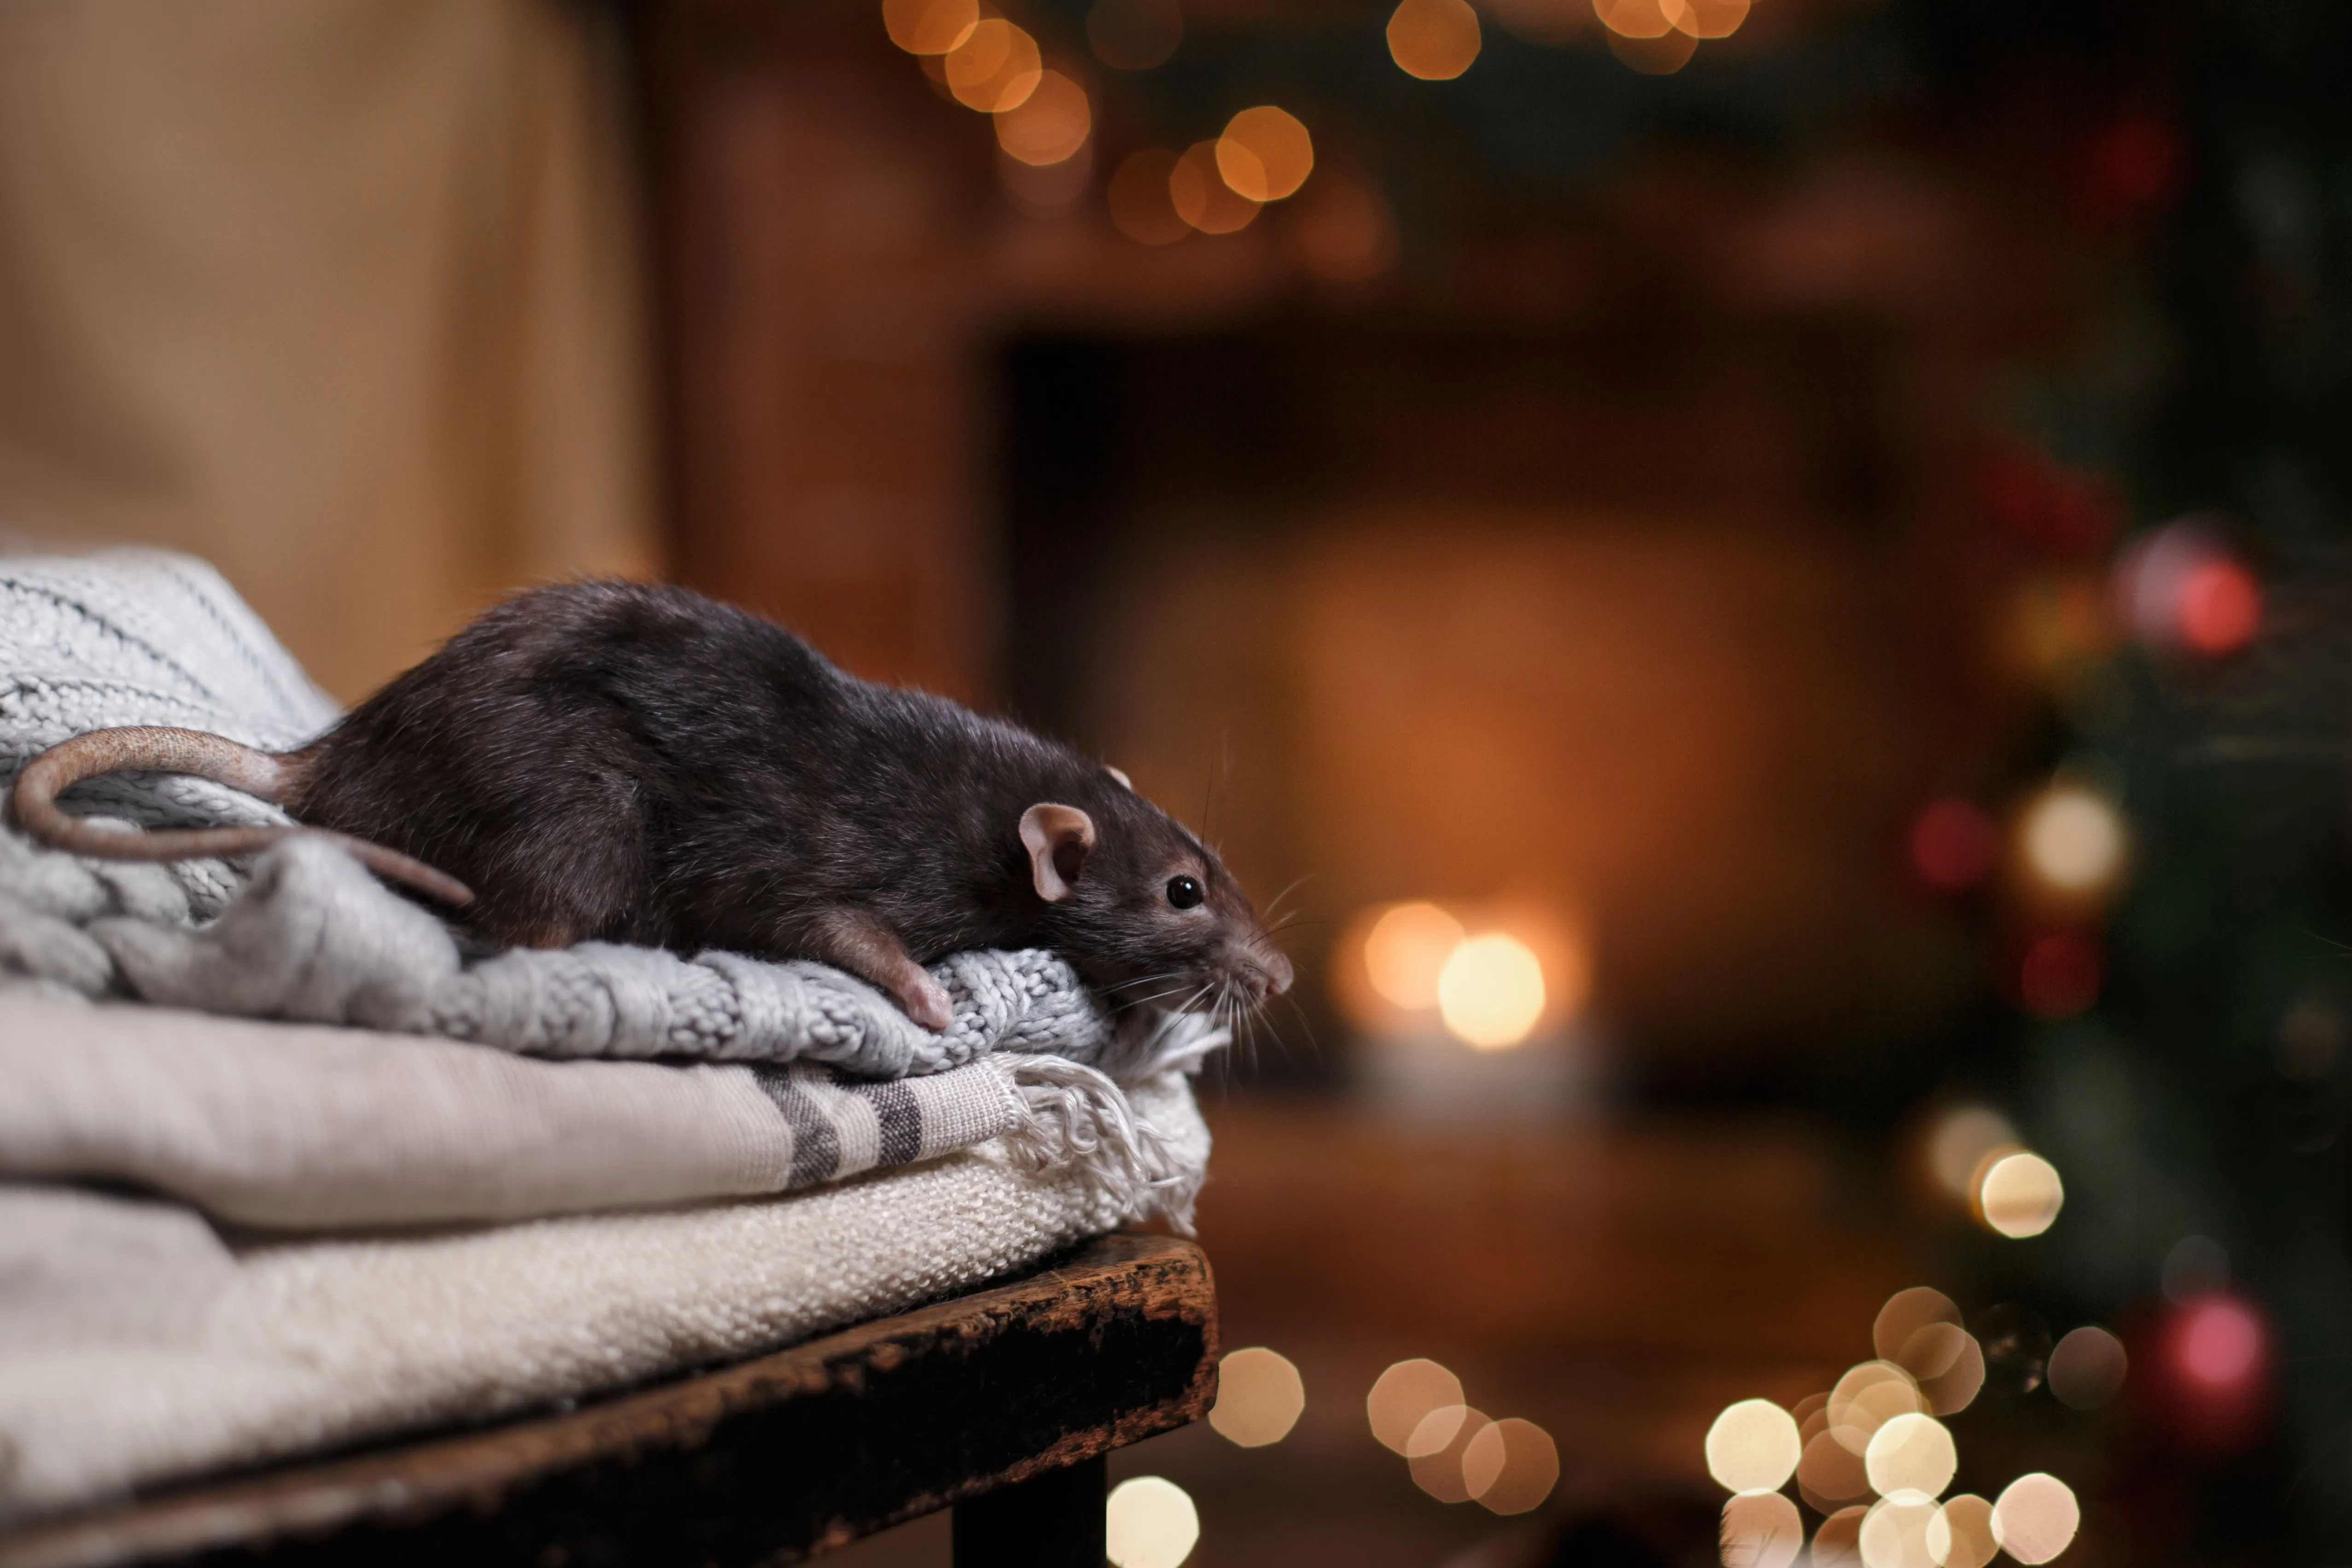 Preparing for Winter Part 1: How to Prevent Winter Pests from Entering Your Home